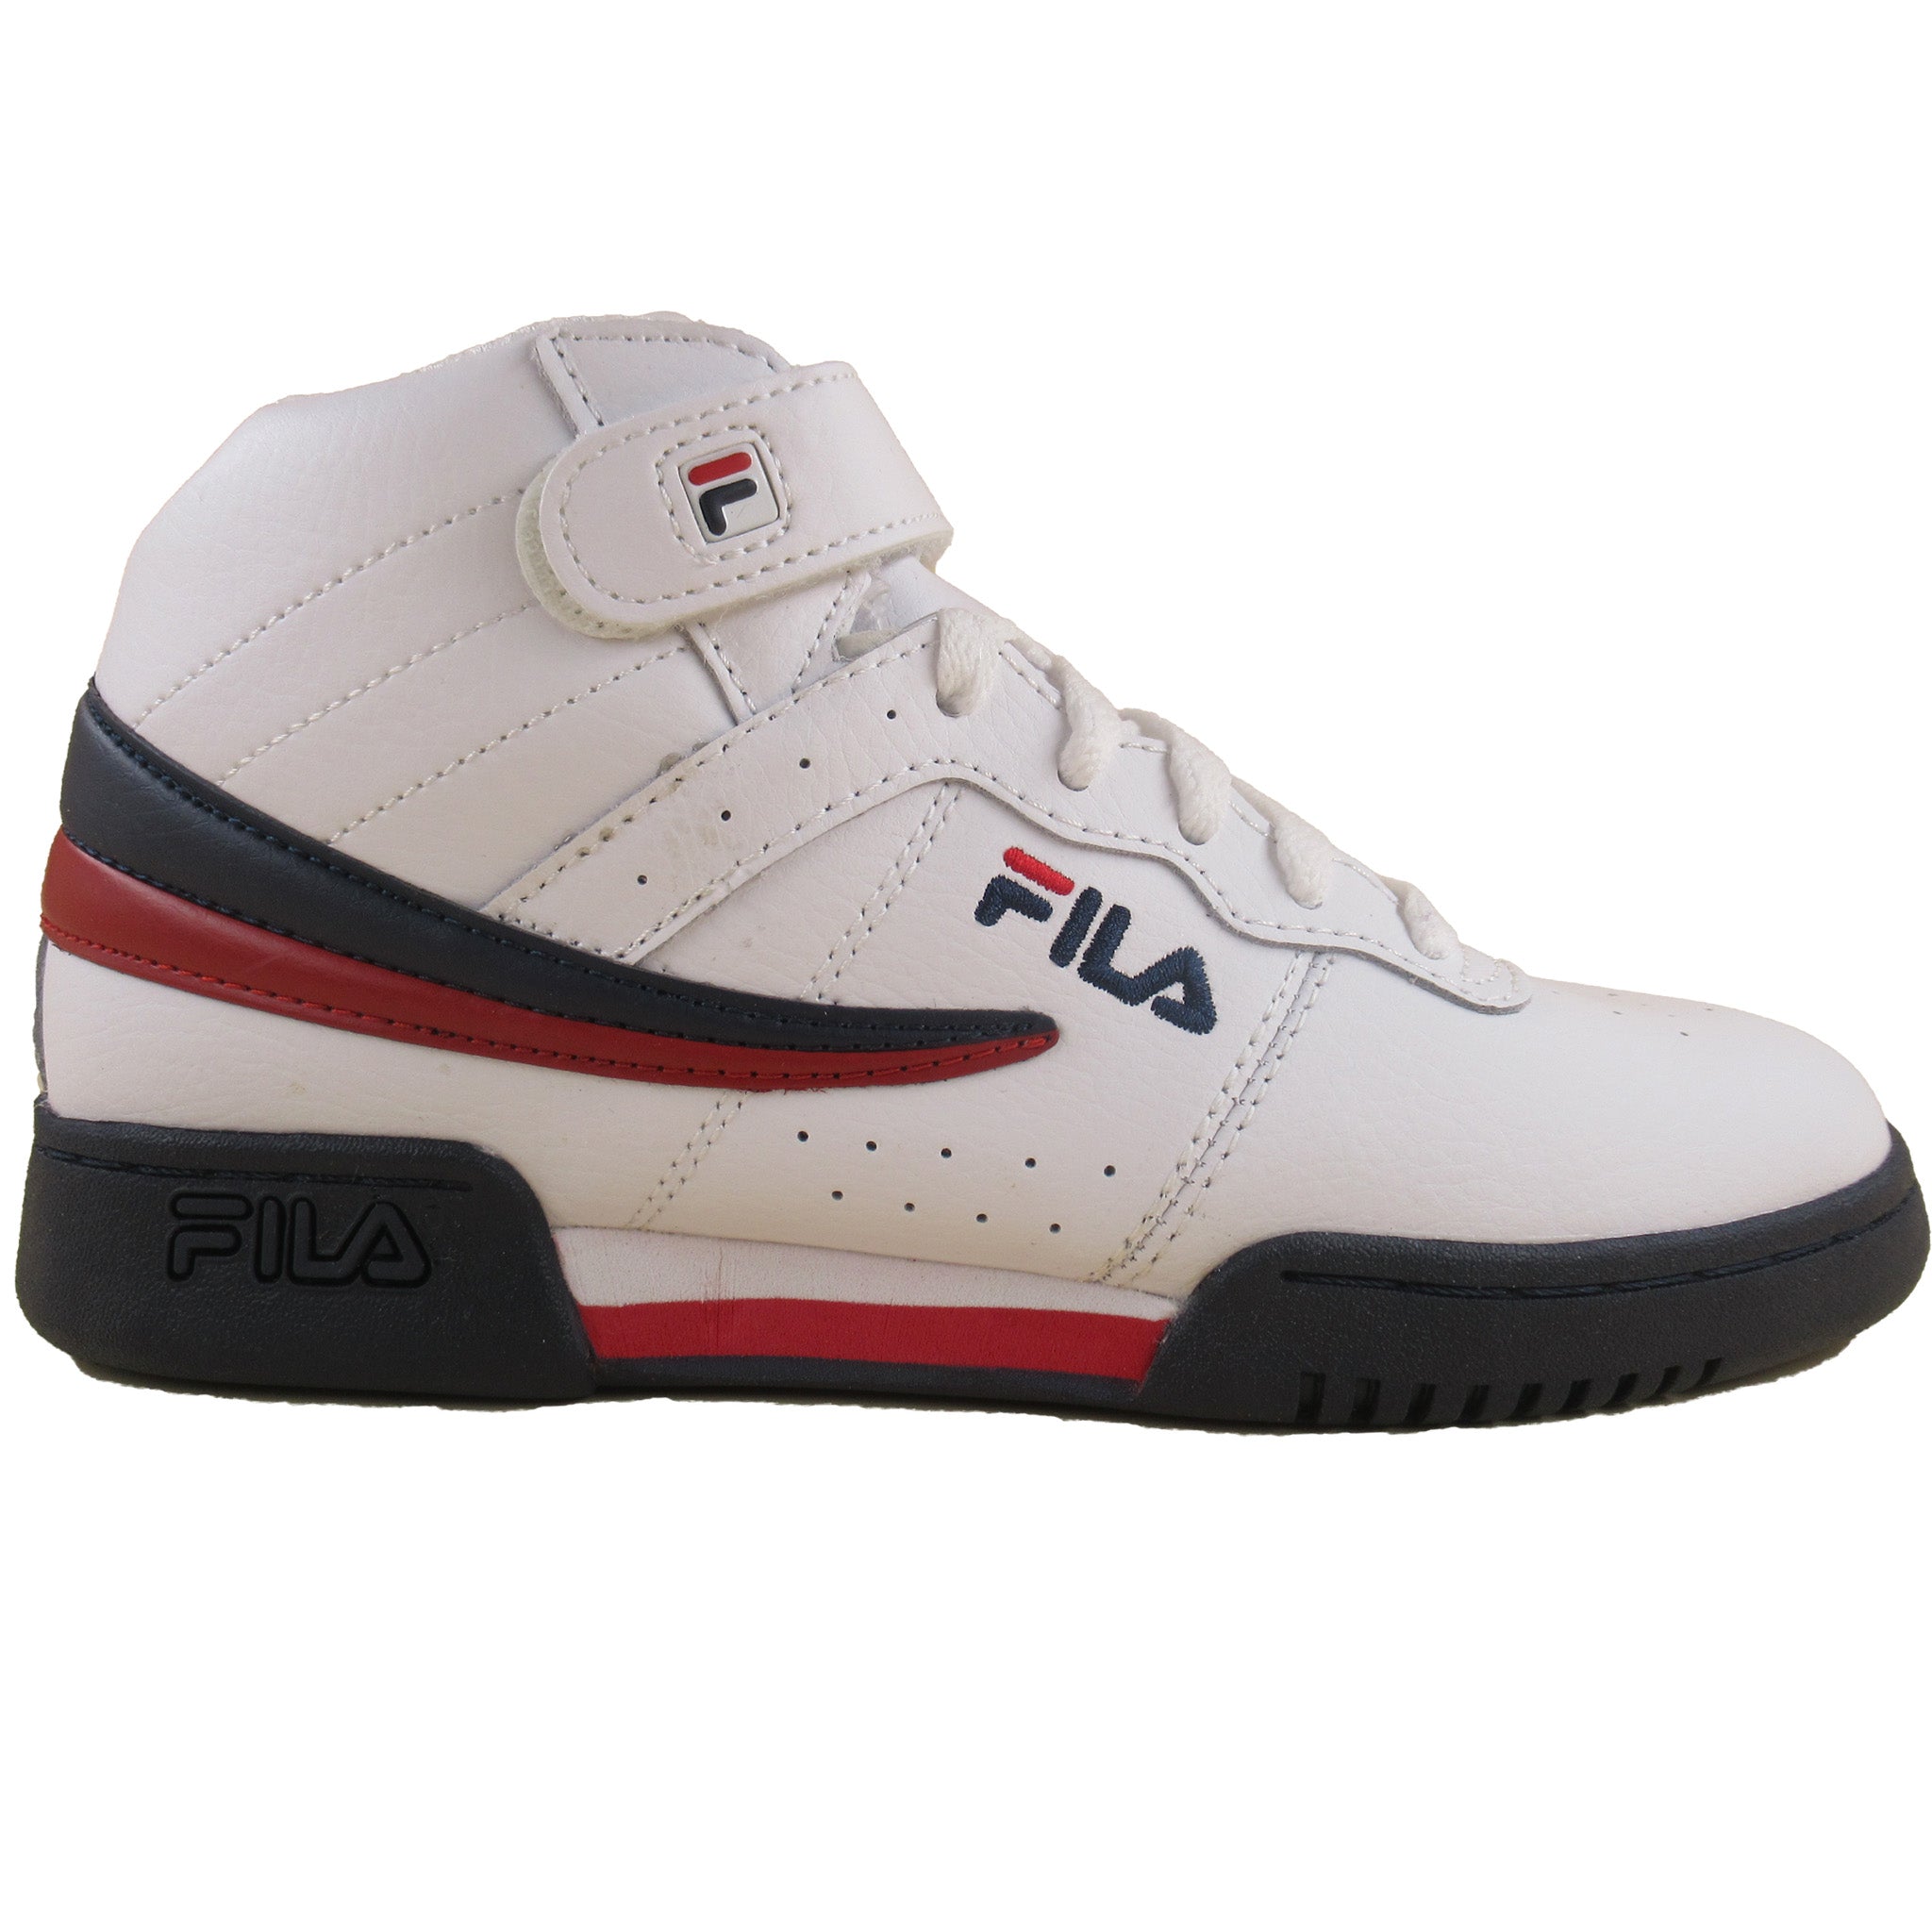 That Grade-School White Fila Red Store F-13 Shoe – Athletic Kids Shoes Casual and Navy More